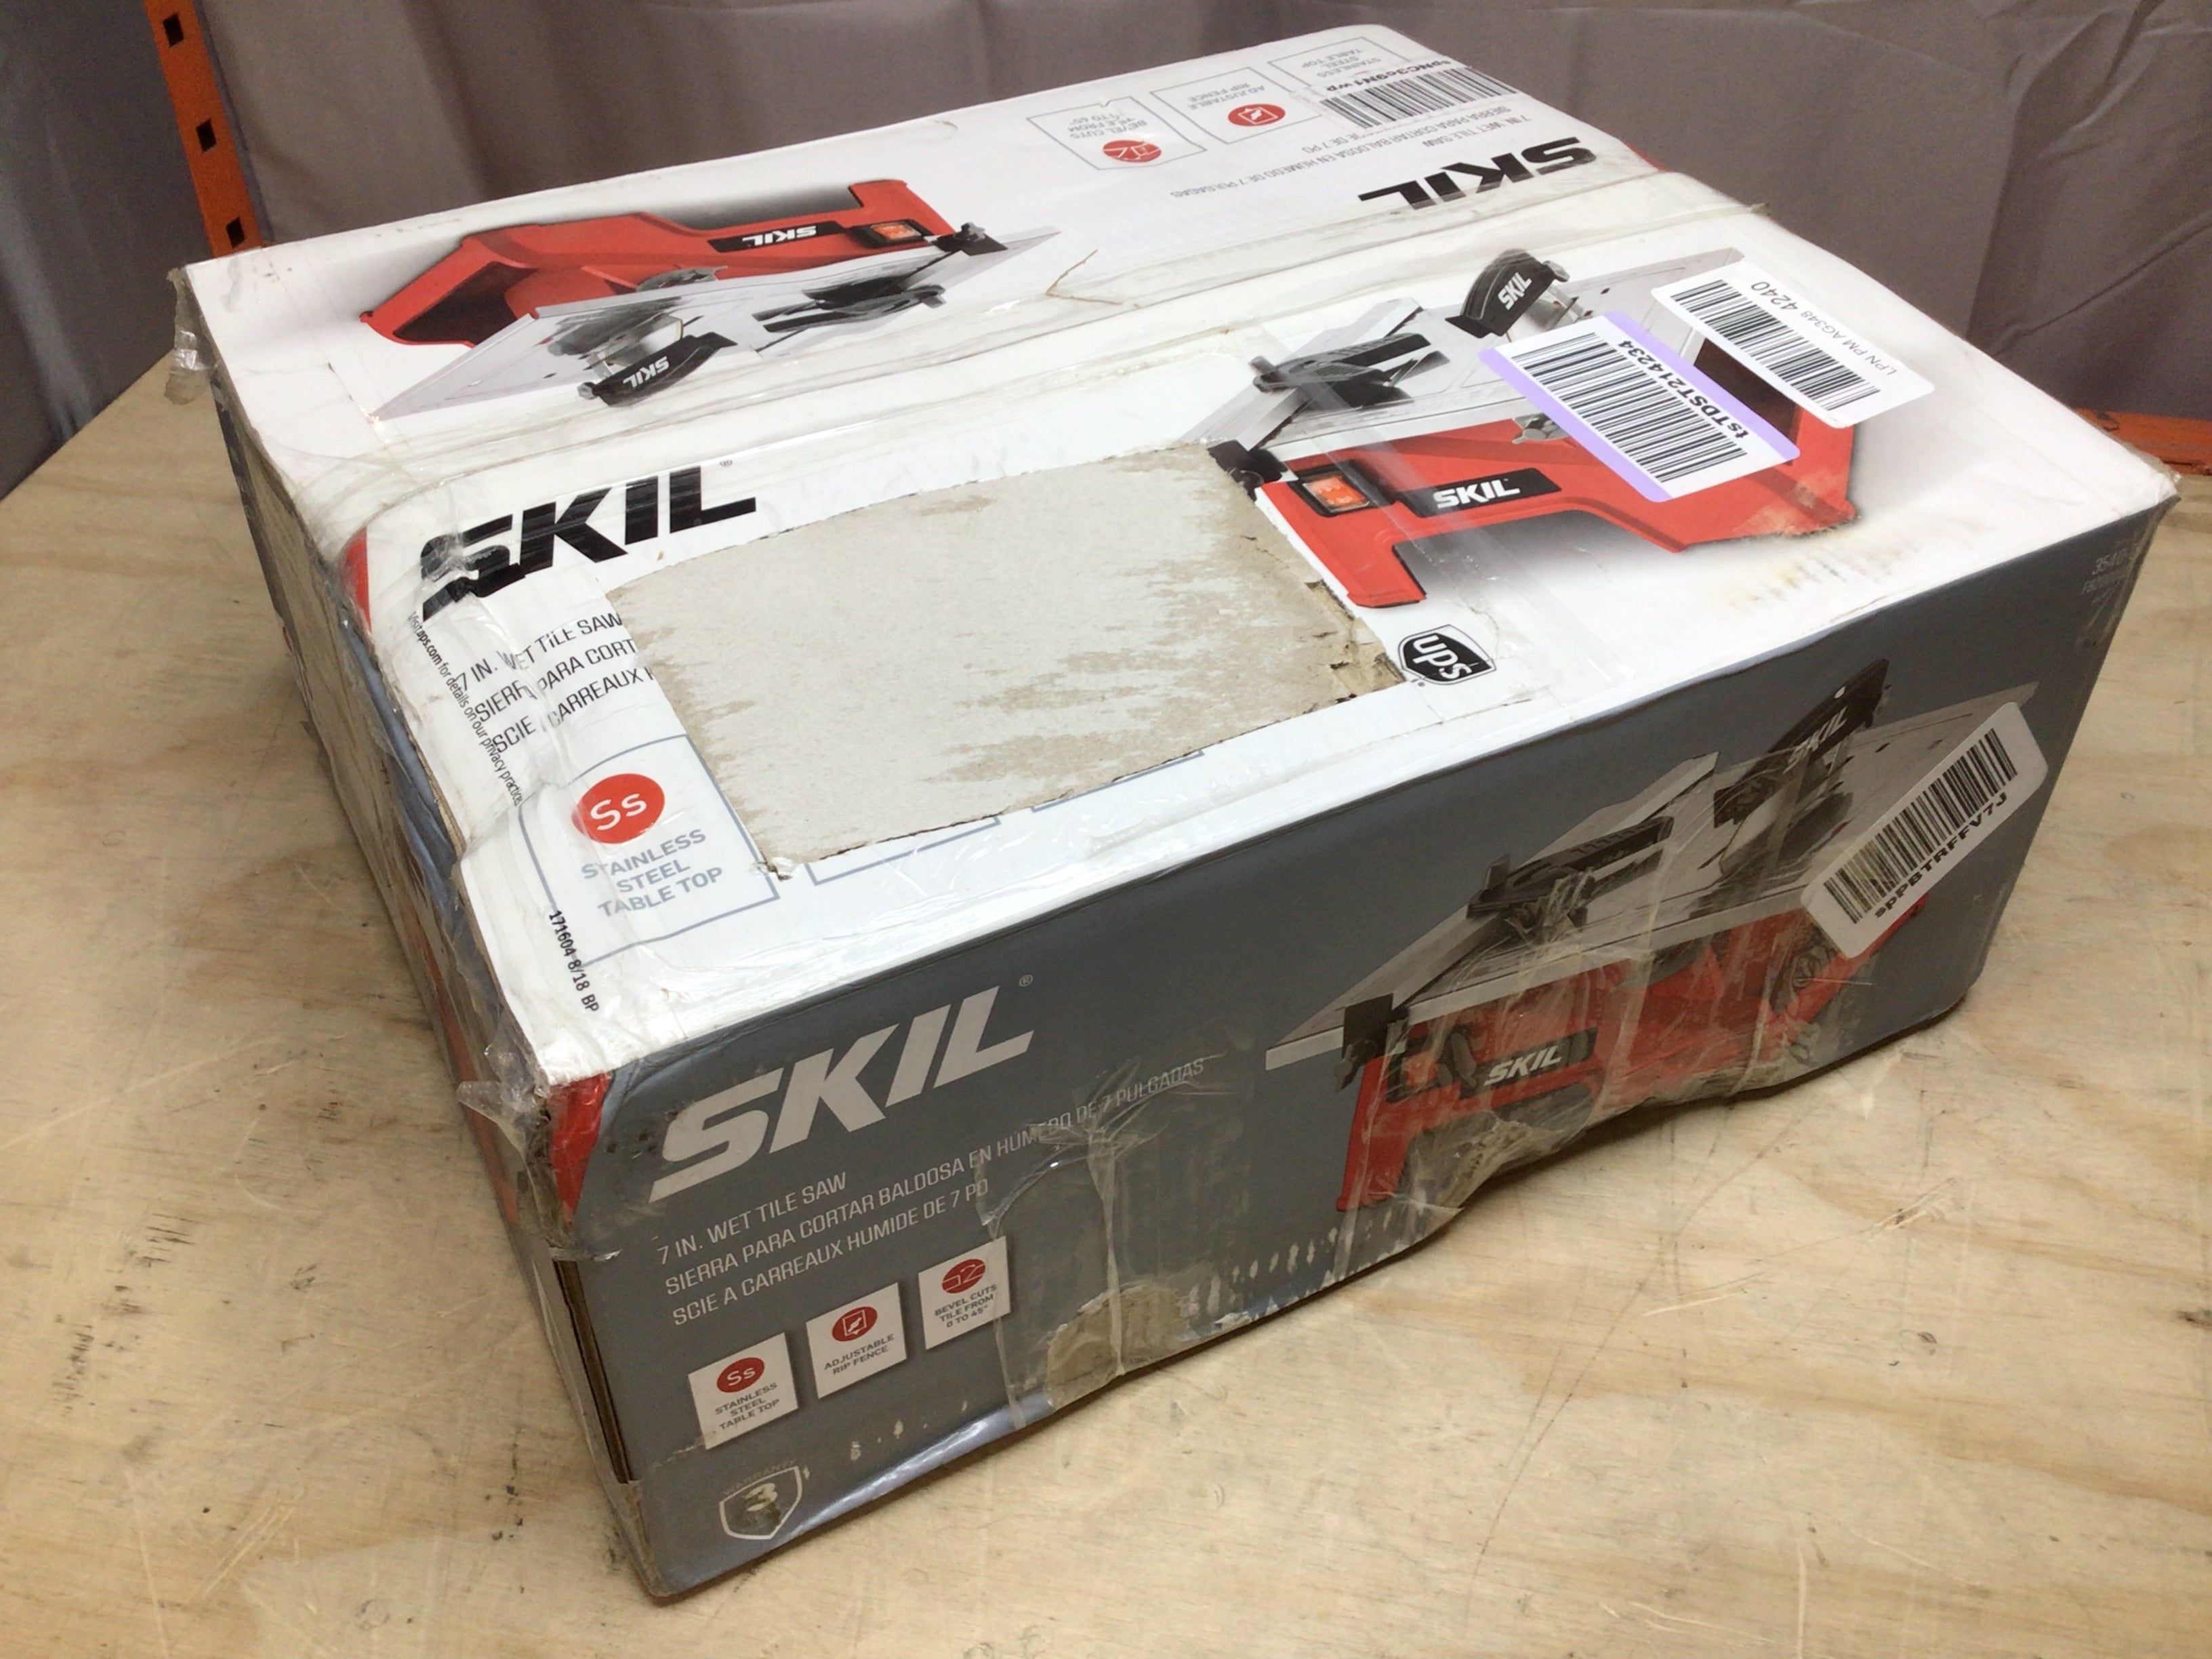 SKIL 7-Inch Wet Tile Saw (3540-02) Stainless Steel Table *OPEN BOX* (8141289586926)